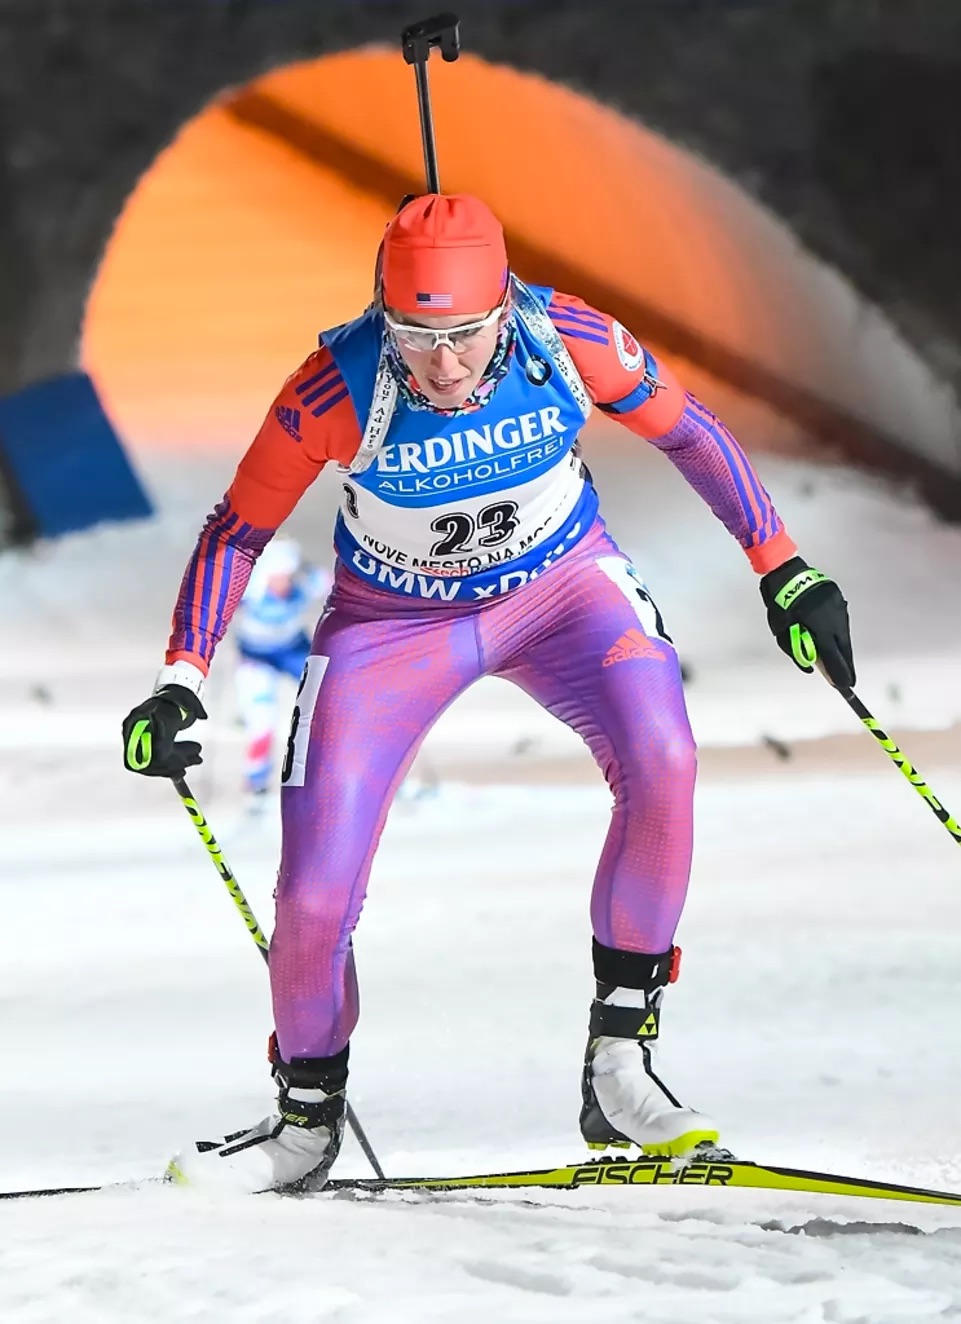 US Biathlon’s Susan Dunklee on her way to finishing third in the women’s sprint at the IBU World Cup in Nove Mesto, Czech Republic. It was the third podium of her career. (Photo: IBU)